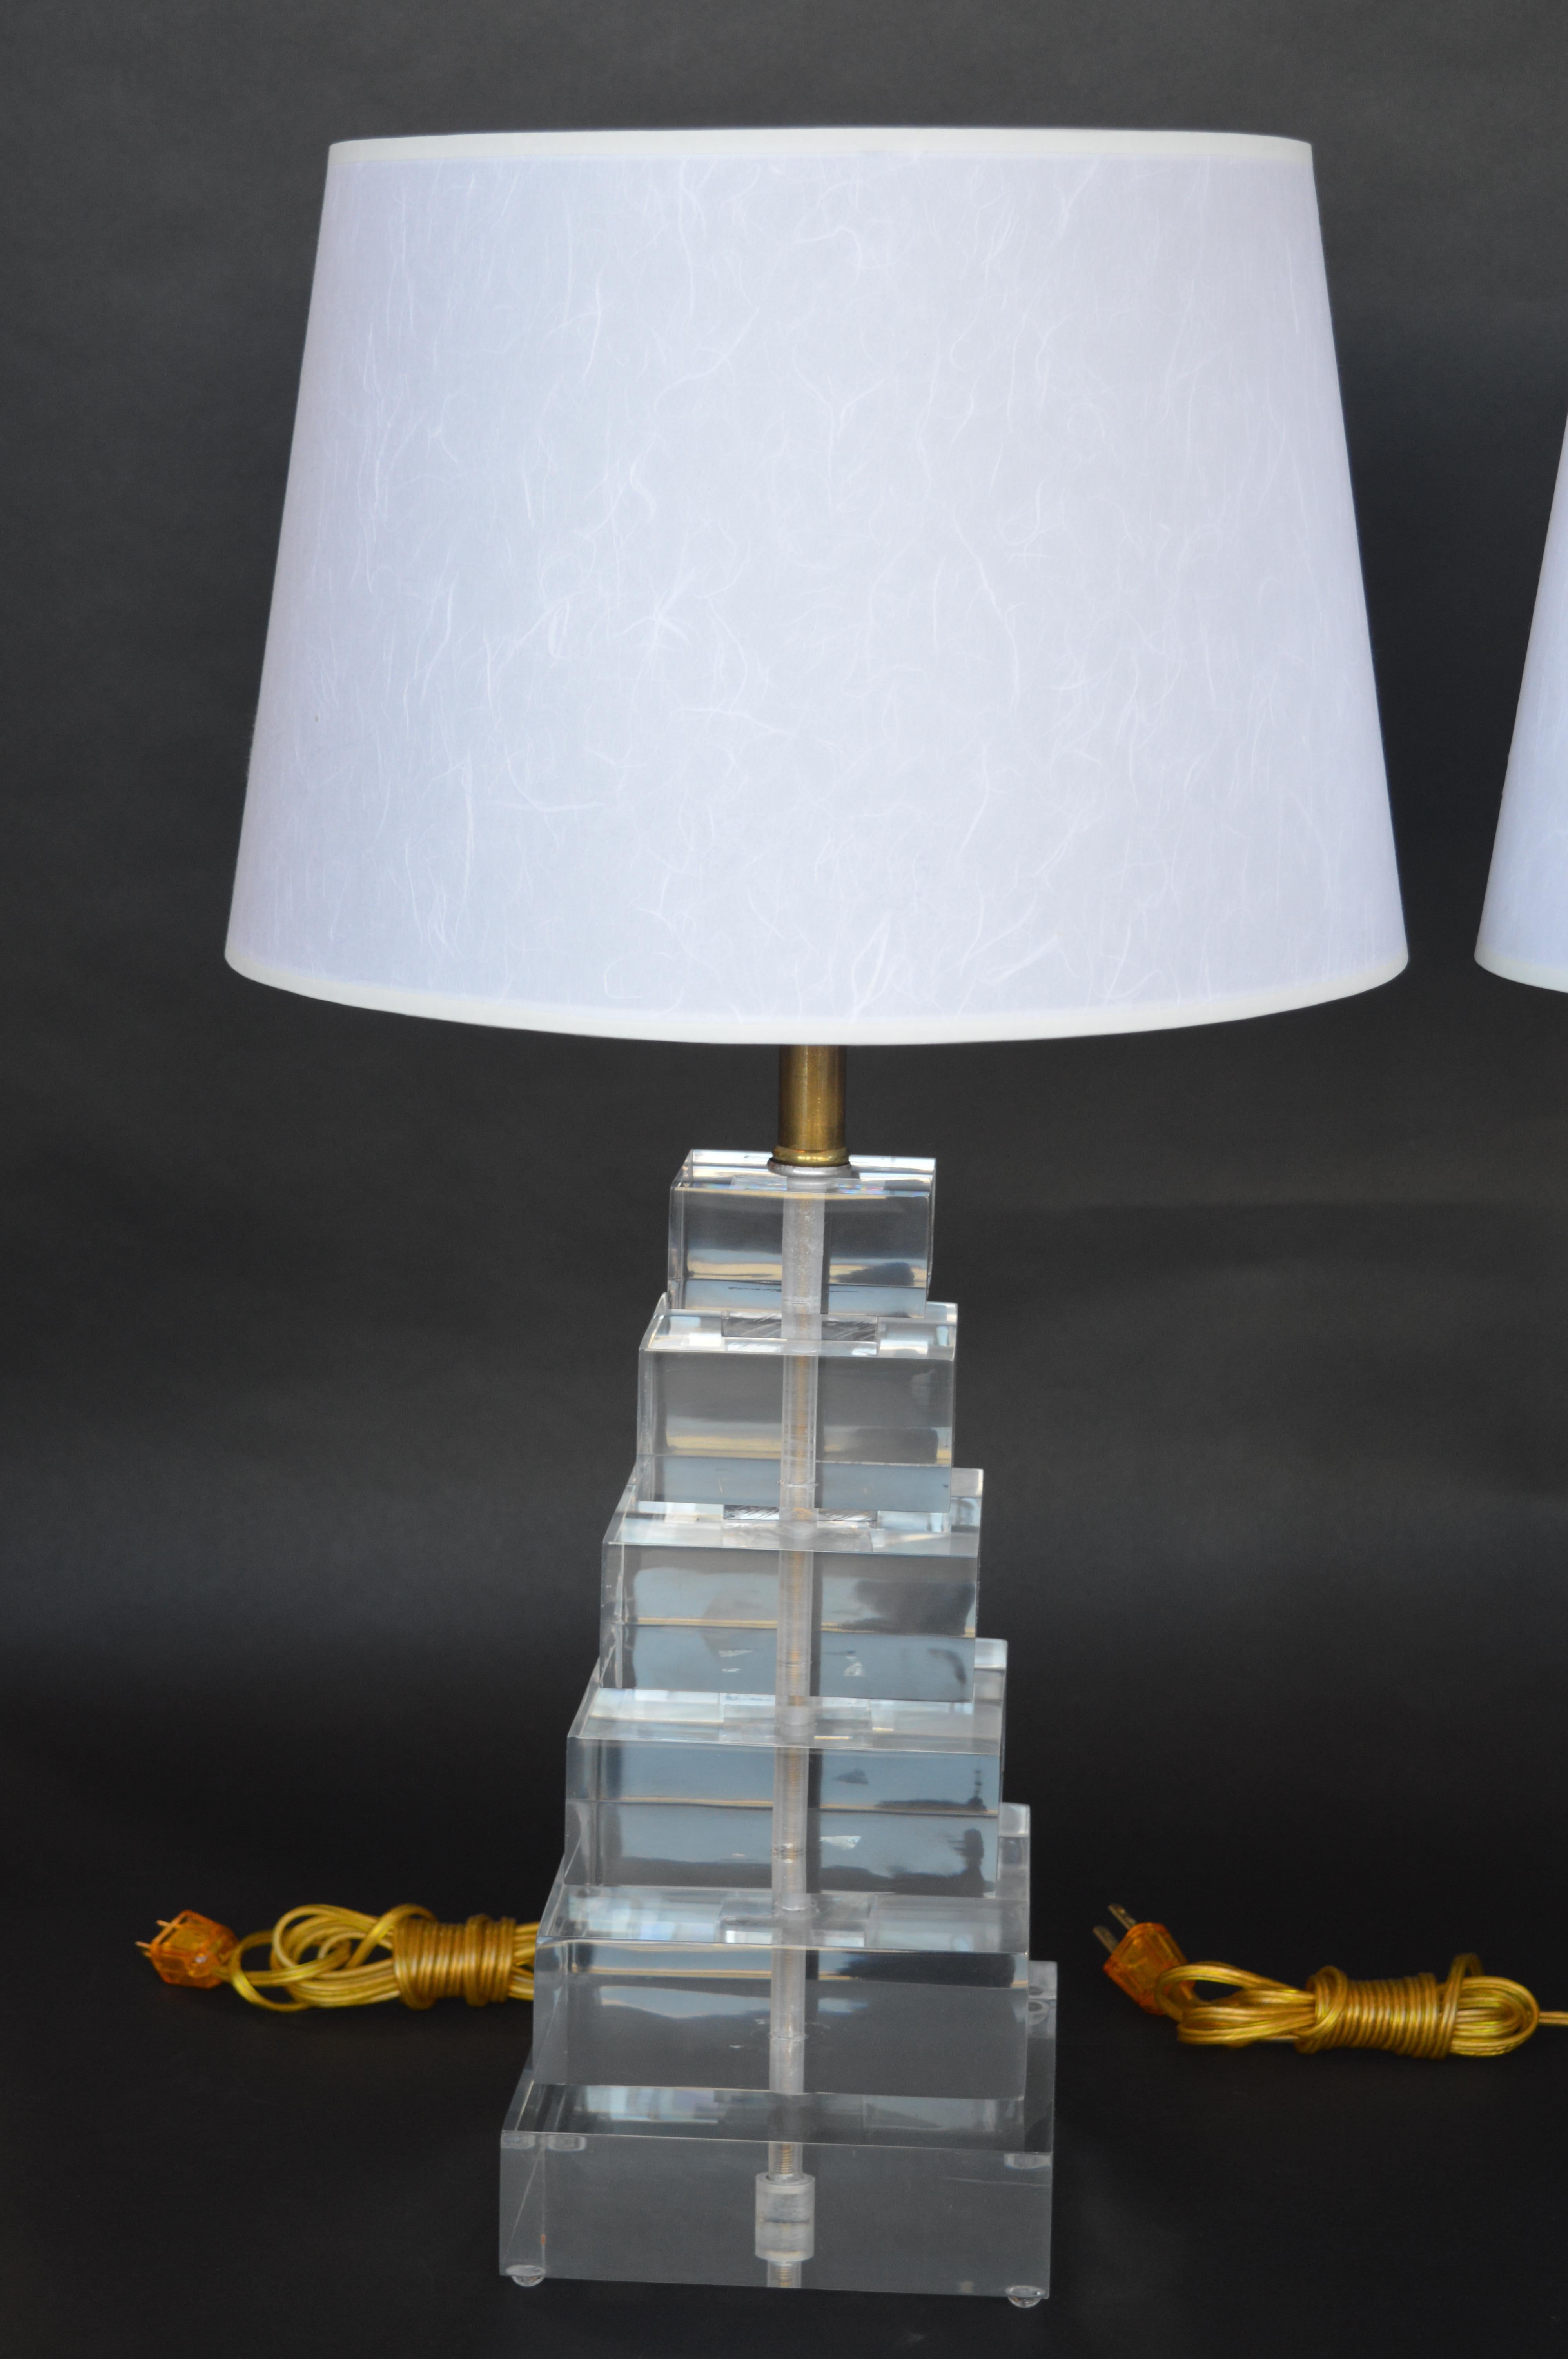 Pair of stacked square acrylic lamps.
Measurements with the shade are 27 inches H x 15 inches D.